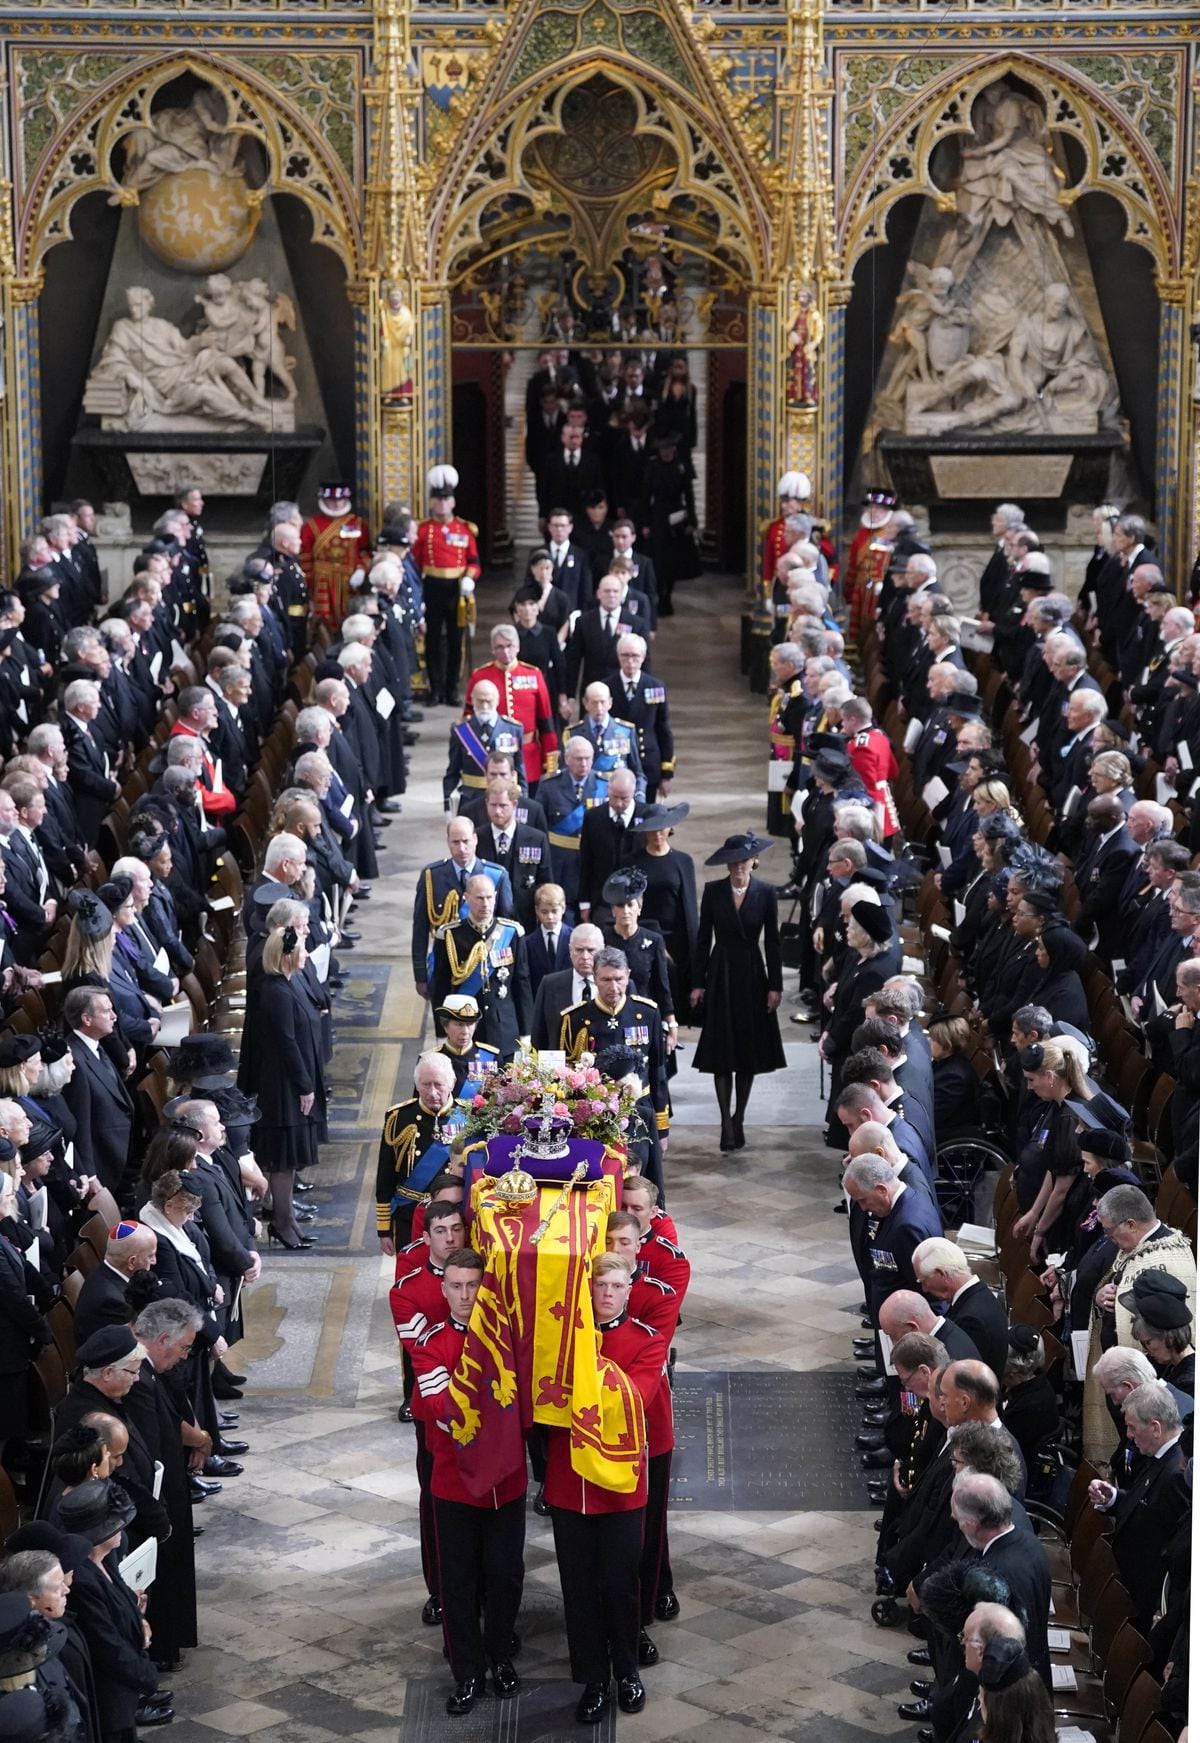 King Charles III, the Queen Consort, the Princess Royal, Vice Admiral Sir Tim Laurence, the Duke of York, the Earl of Wessex, the Countess of Wessex, the Prince of Wales, the Princess of Wales, Prince George, Princess Charlotte, the Duke of Sussex, the Duchess of Sussex, Peter Phillips and the Earl of Snowdon follow behind the coffin of Queen Elizabeth II, draped in the Royal Standard with the Imperial State Crown and the Sovereign's orb and sceptre, as it is carried out of Westminster Abbey after her State Funeral. Picture date: Monday September 19, 2022. (31281910)